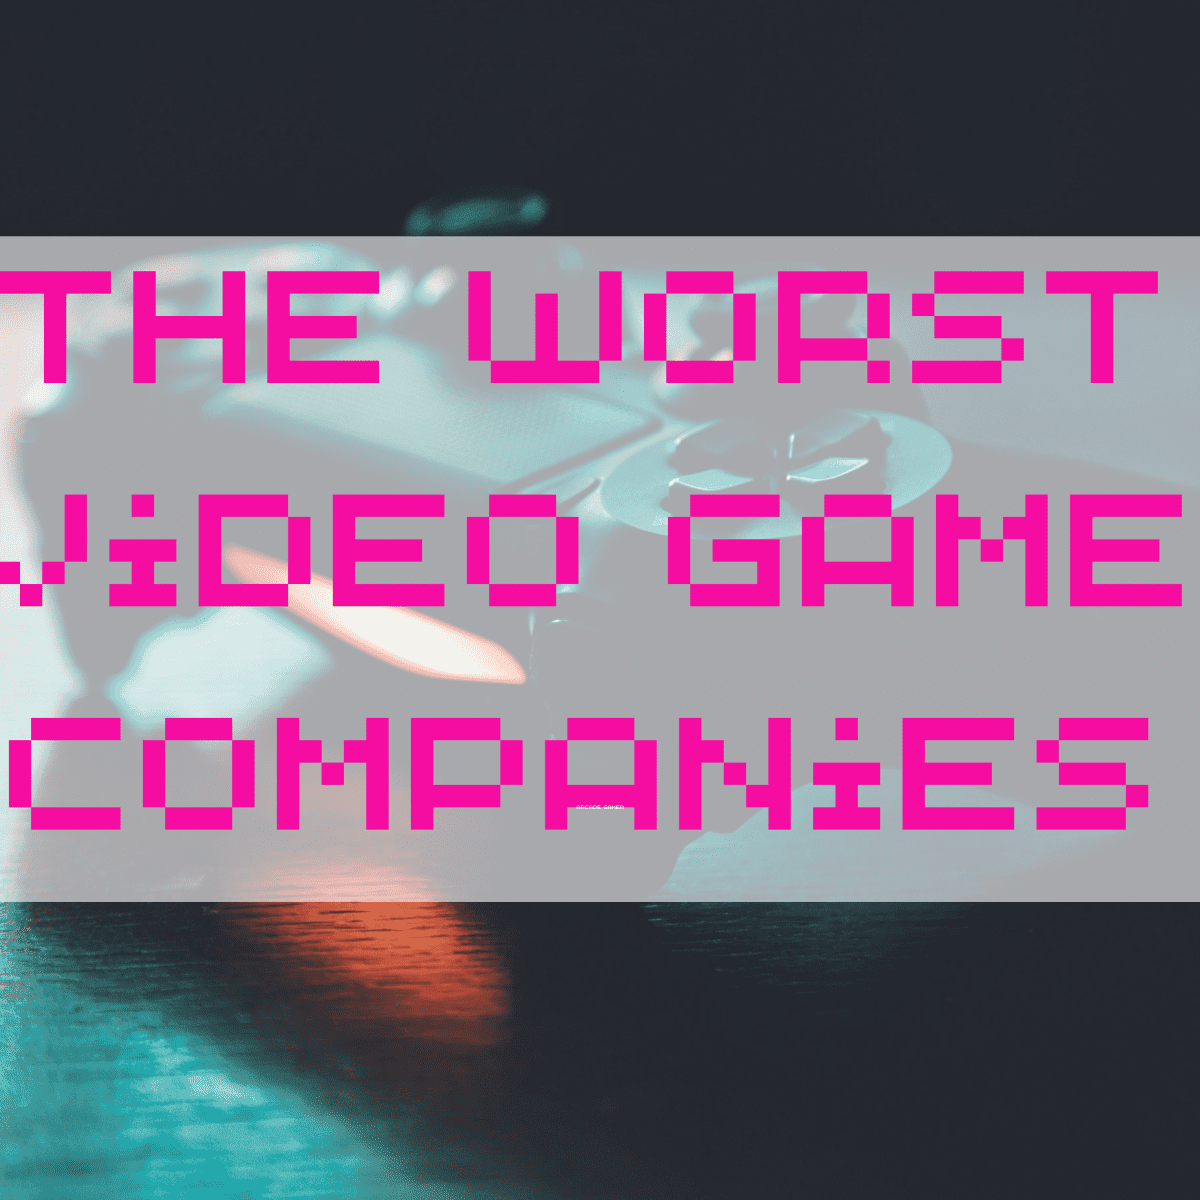 Game Developers Open Up About The 'Worst' Games They Worked On